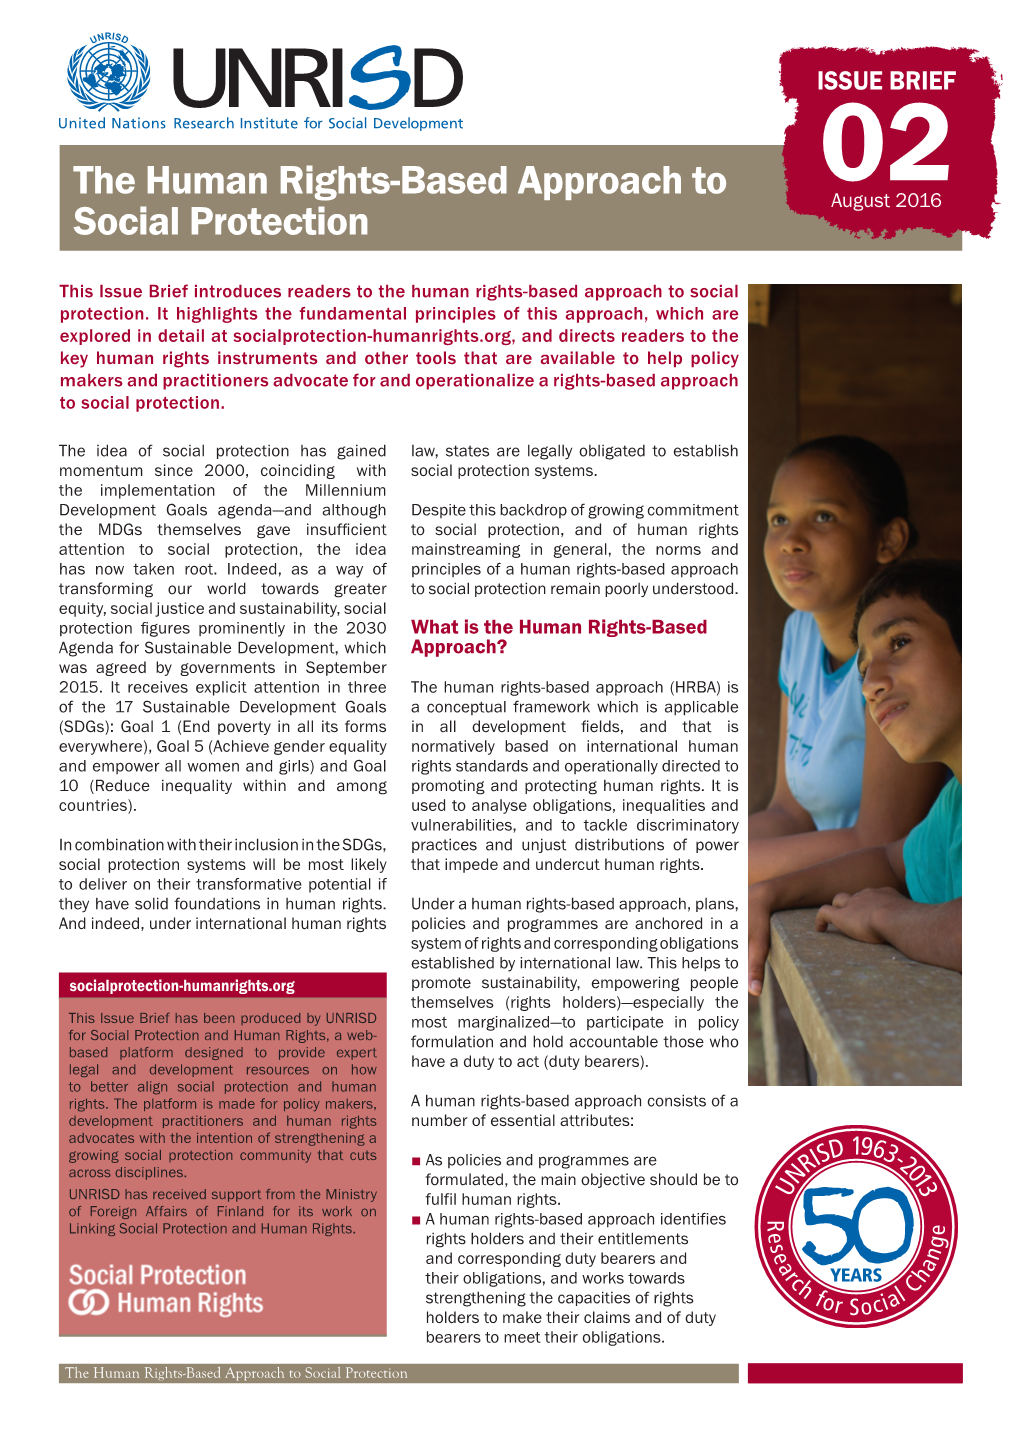 The Human Rights-Based Approach to Social Protection